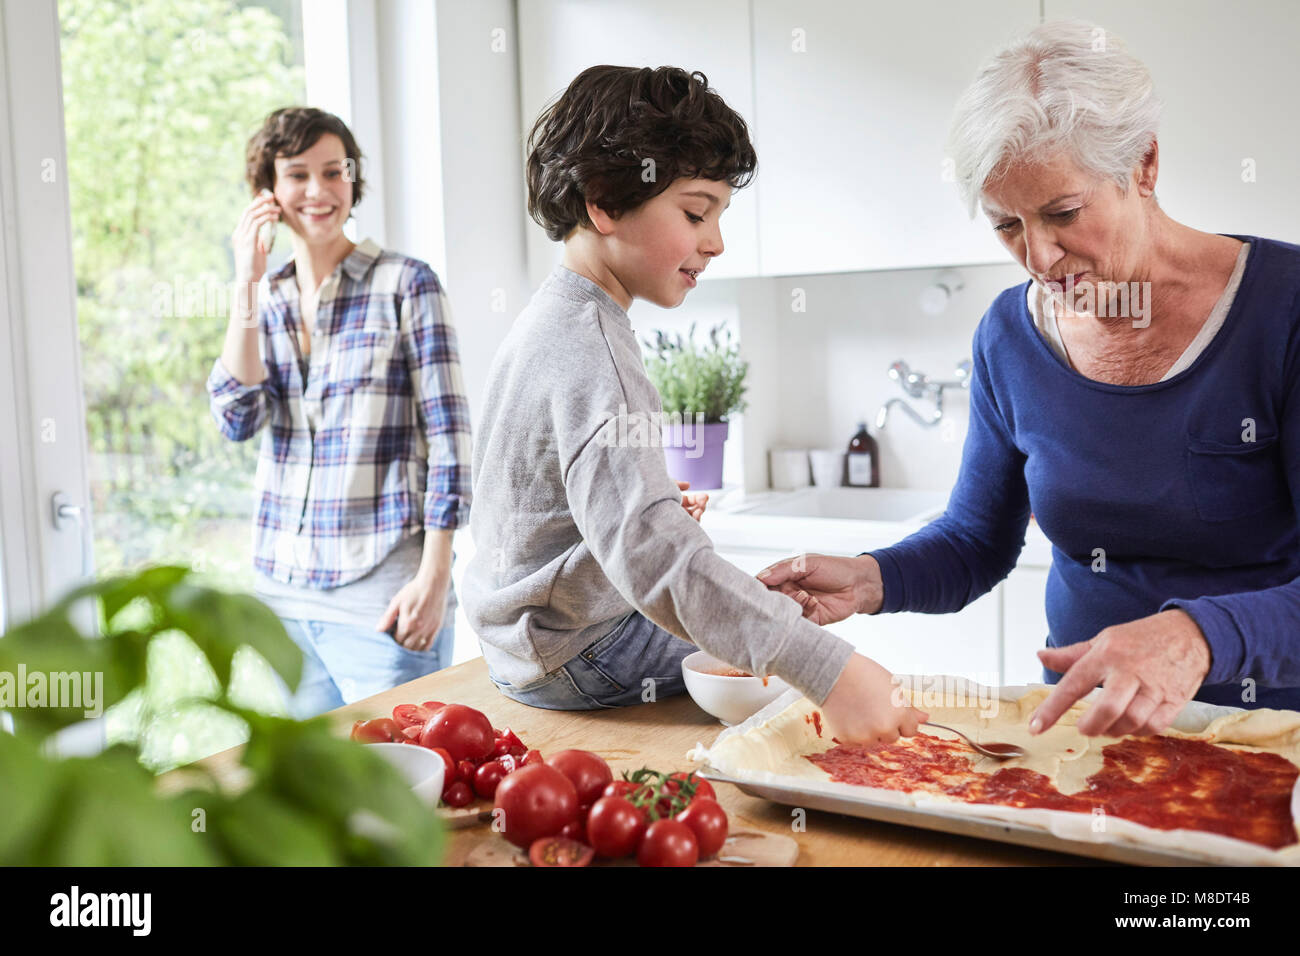 Grandmother and grandson making pizza in kitchen, mother in background using smartphone Stock Photo